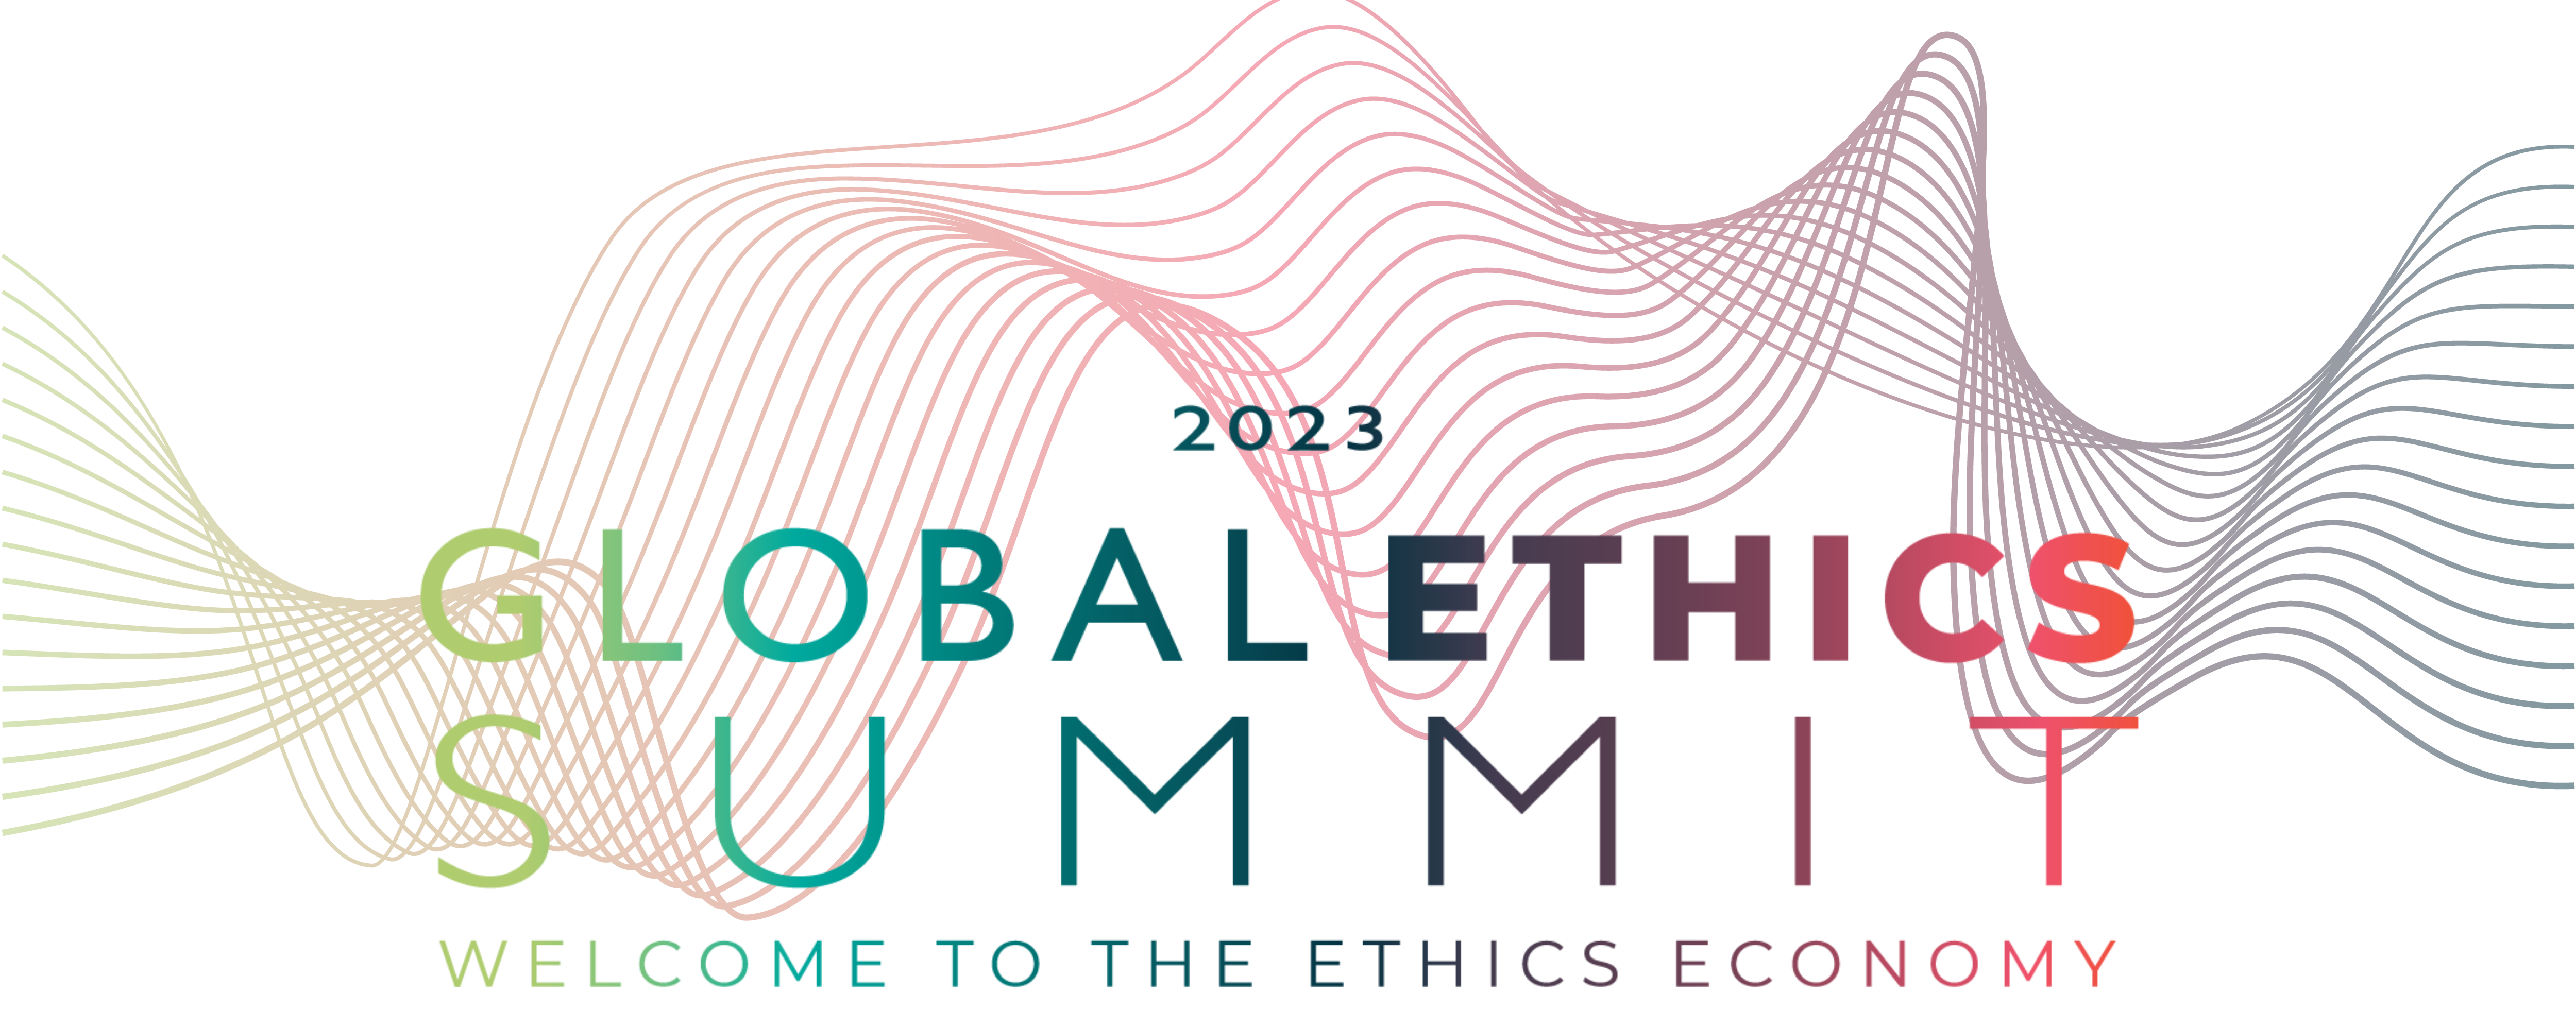 Ethisphere Announces Global Ethics Summit Speakers and Sessions